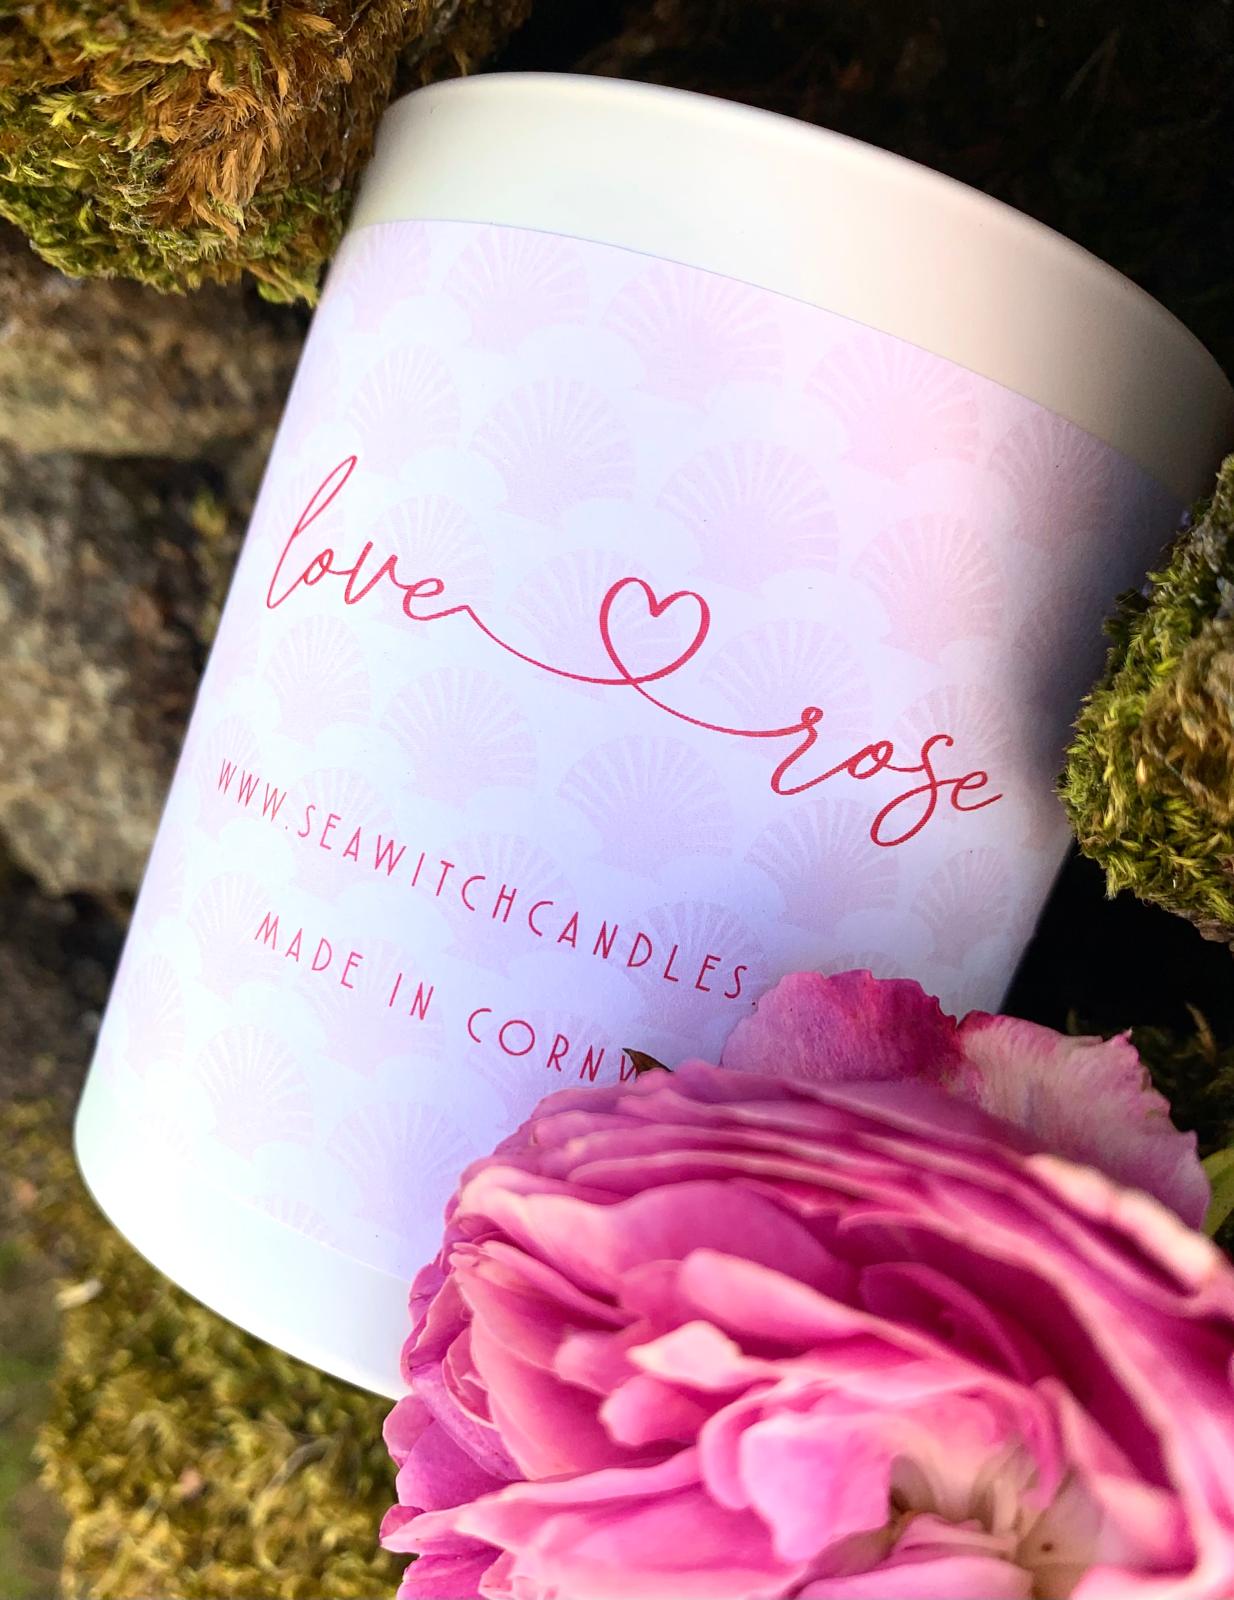 Love Rose Candle  £22  Beautiful Rose Scented Candle  Burn time of at least 50 hours   Ingredients: natural vegan plant wax, fragrance oils, cotton wick   This candle is hand poured into a white china pot and is made in Mousehole, Cornwall by Seawitch Candles Love candles. Floral candles.Candle lover